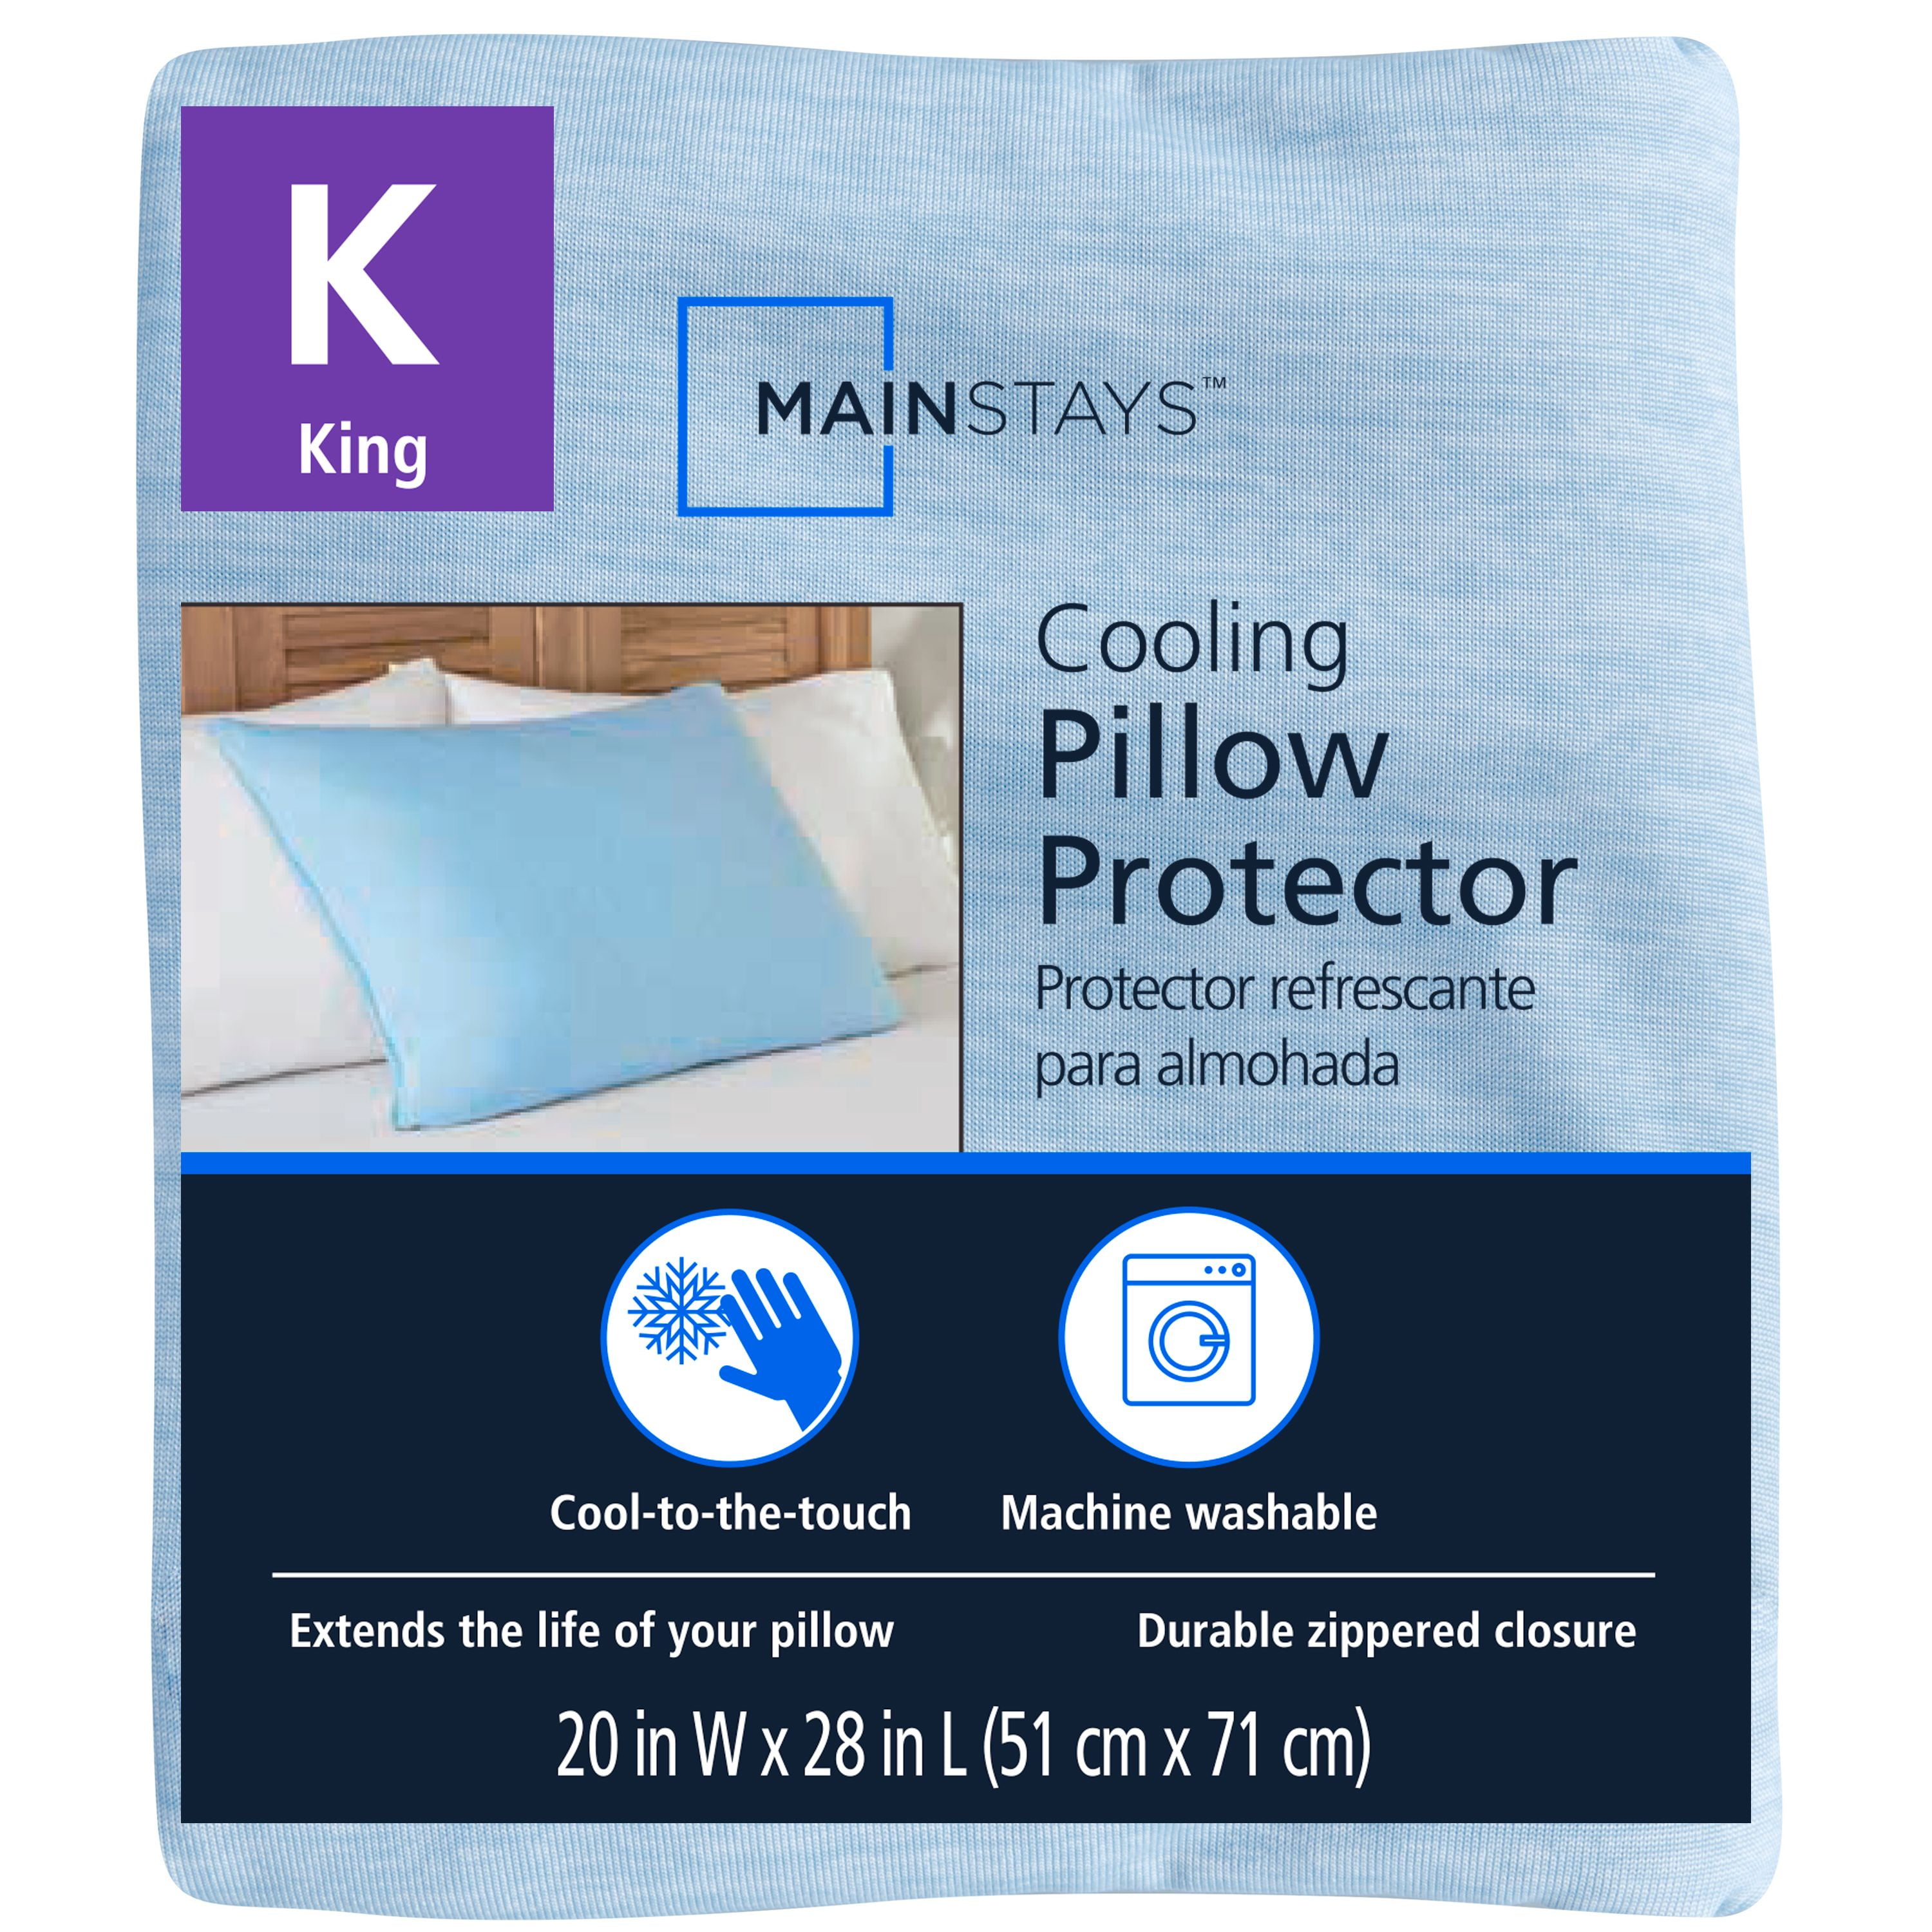 Mainstays Cooling Pillow Protector 